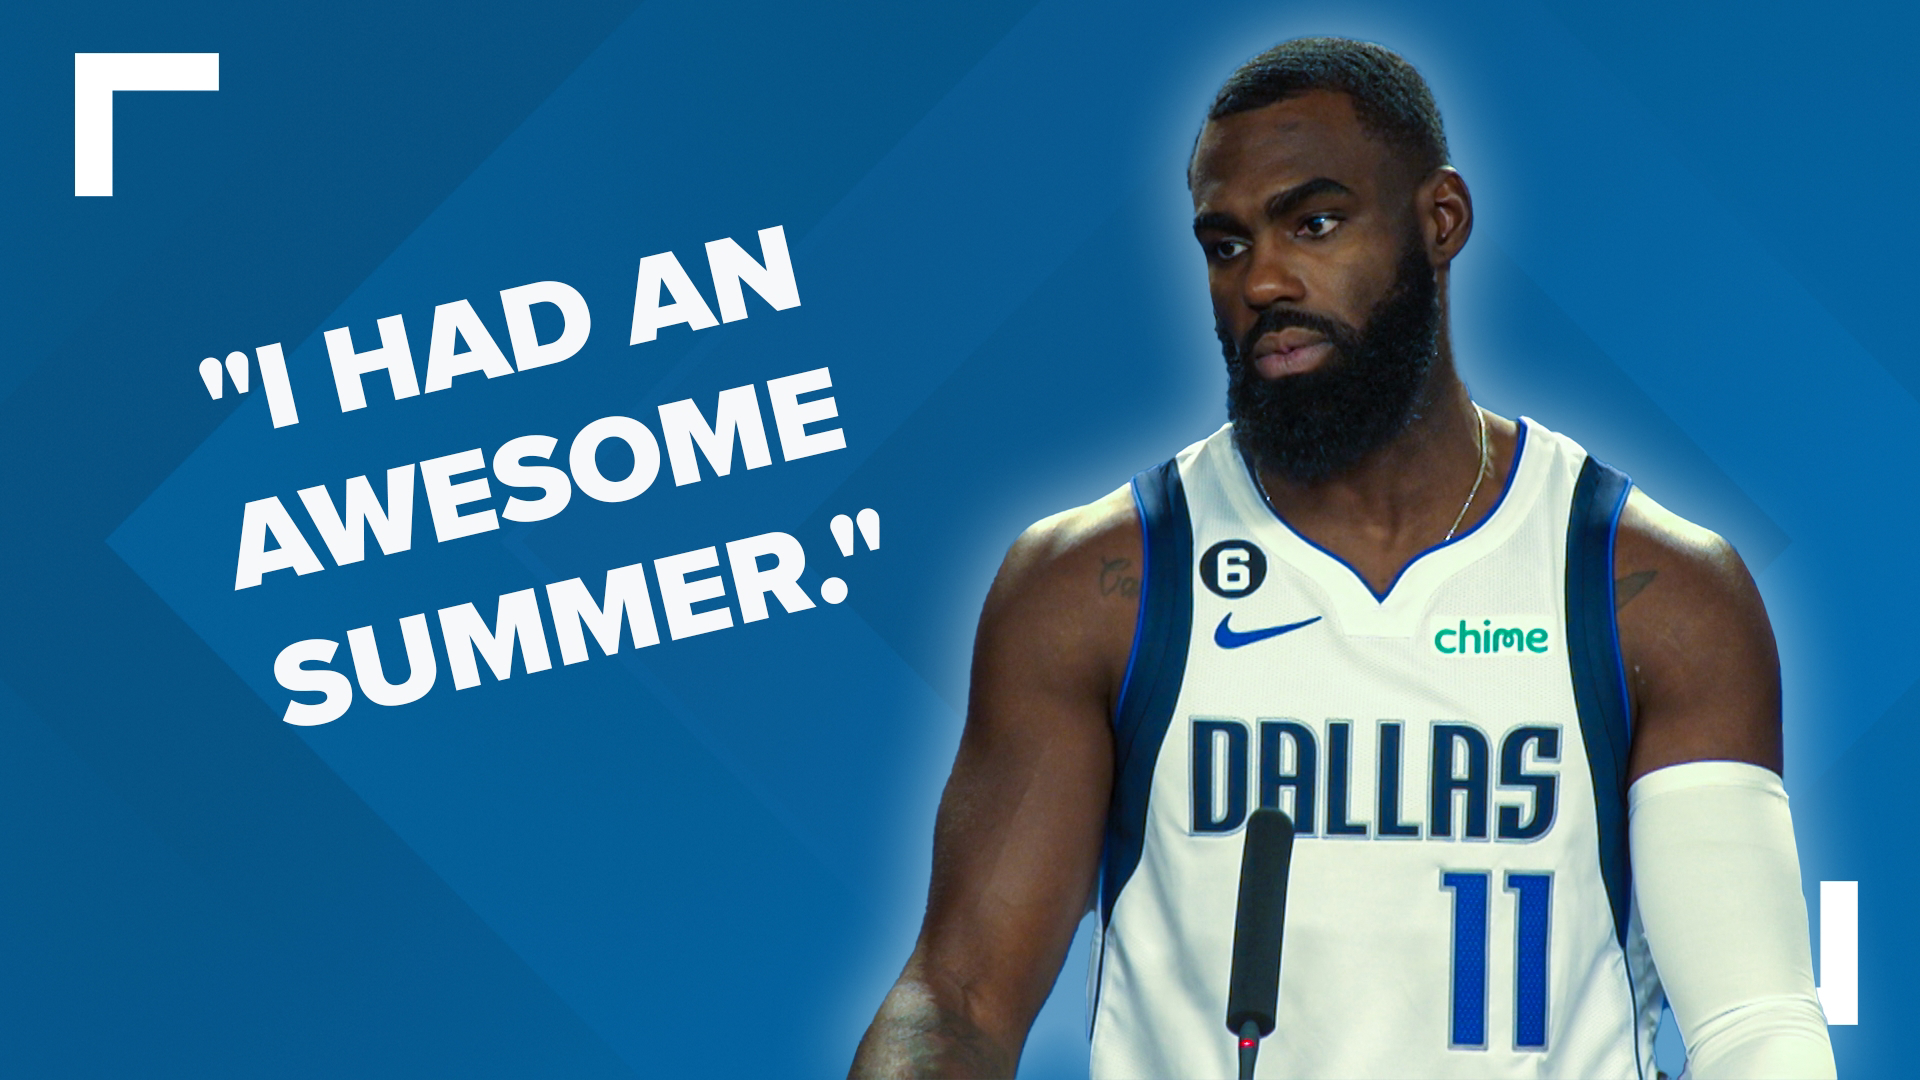 Hardaway Jr. spoke on Monday during Mavs Media Day and talked about his expectations going into the 2022-2023 NBA season.